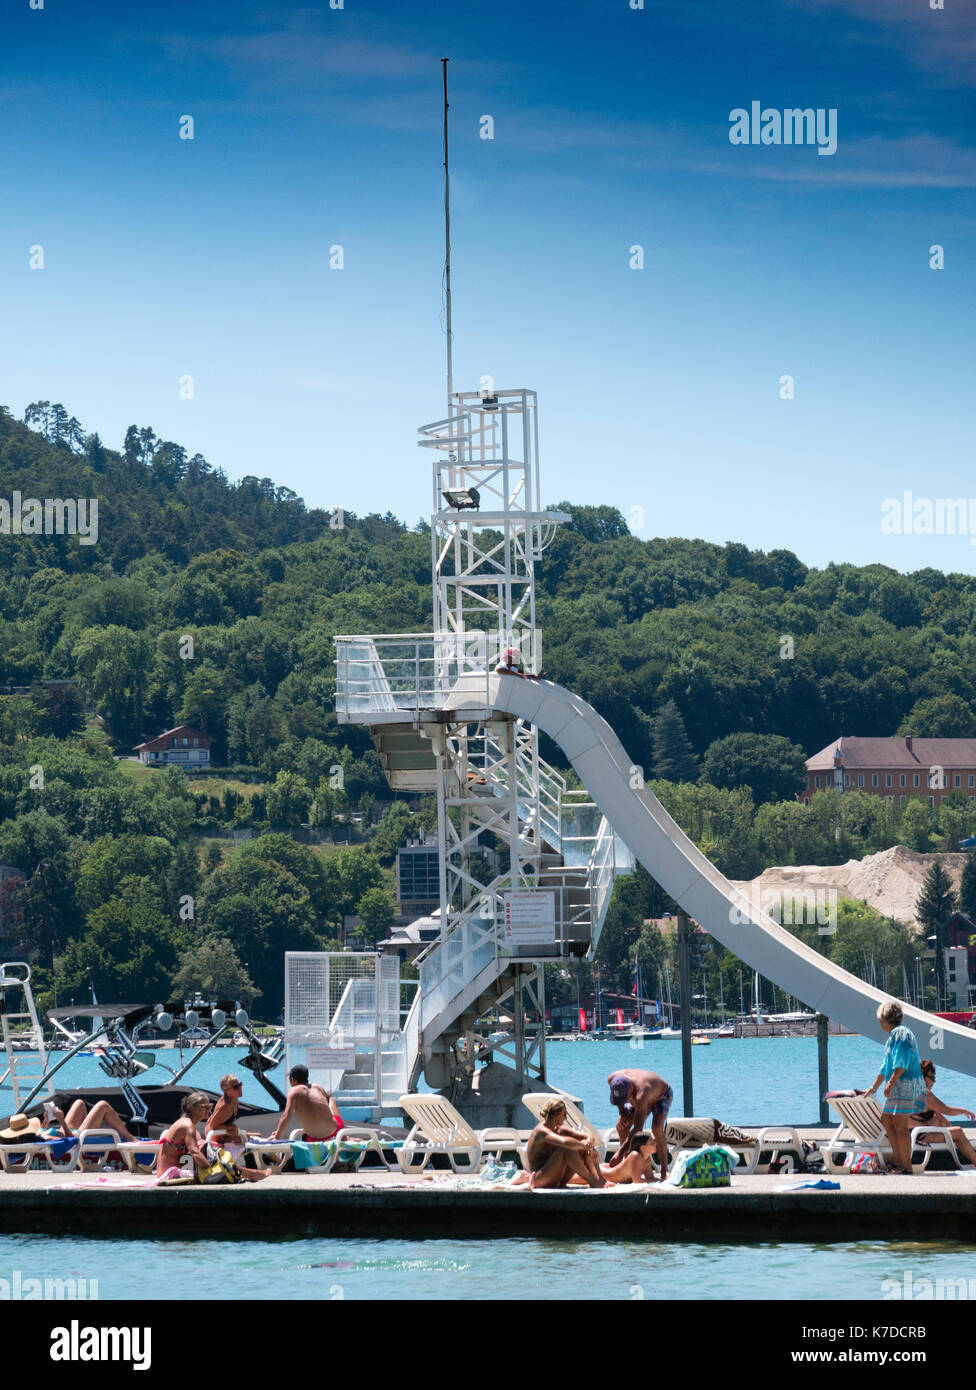 Pop Plage At Lake Annecy Stock Photo 159491343 Alamy